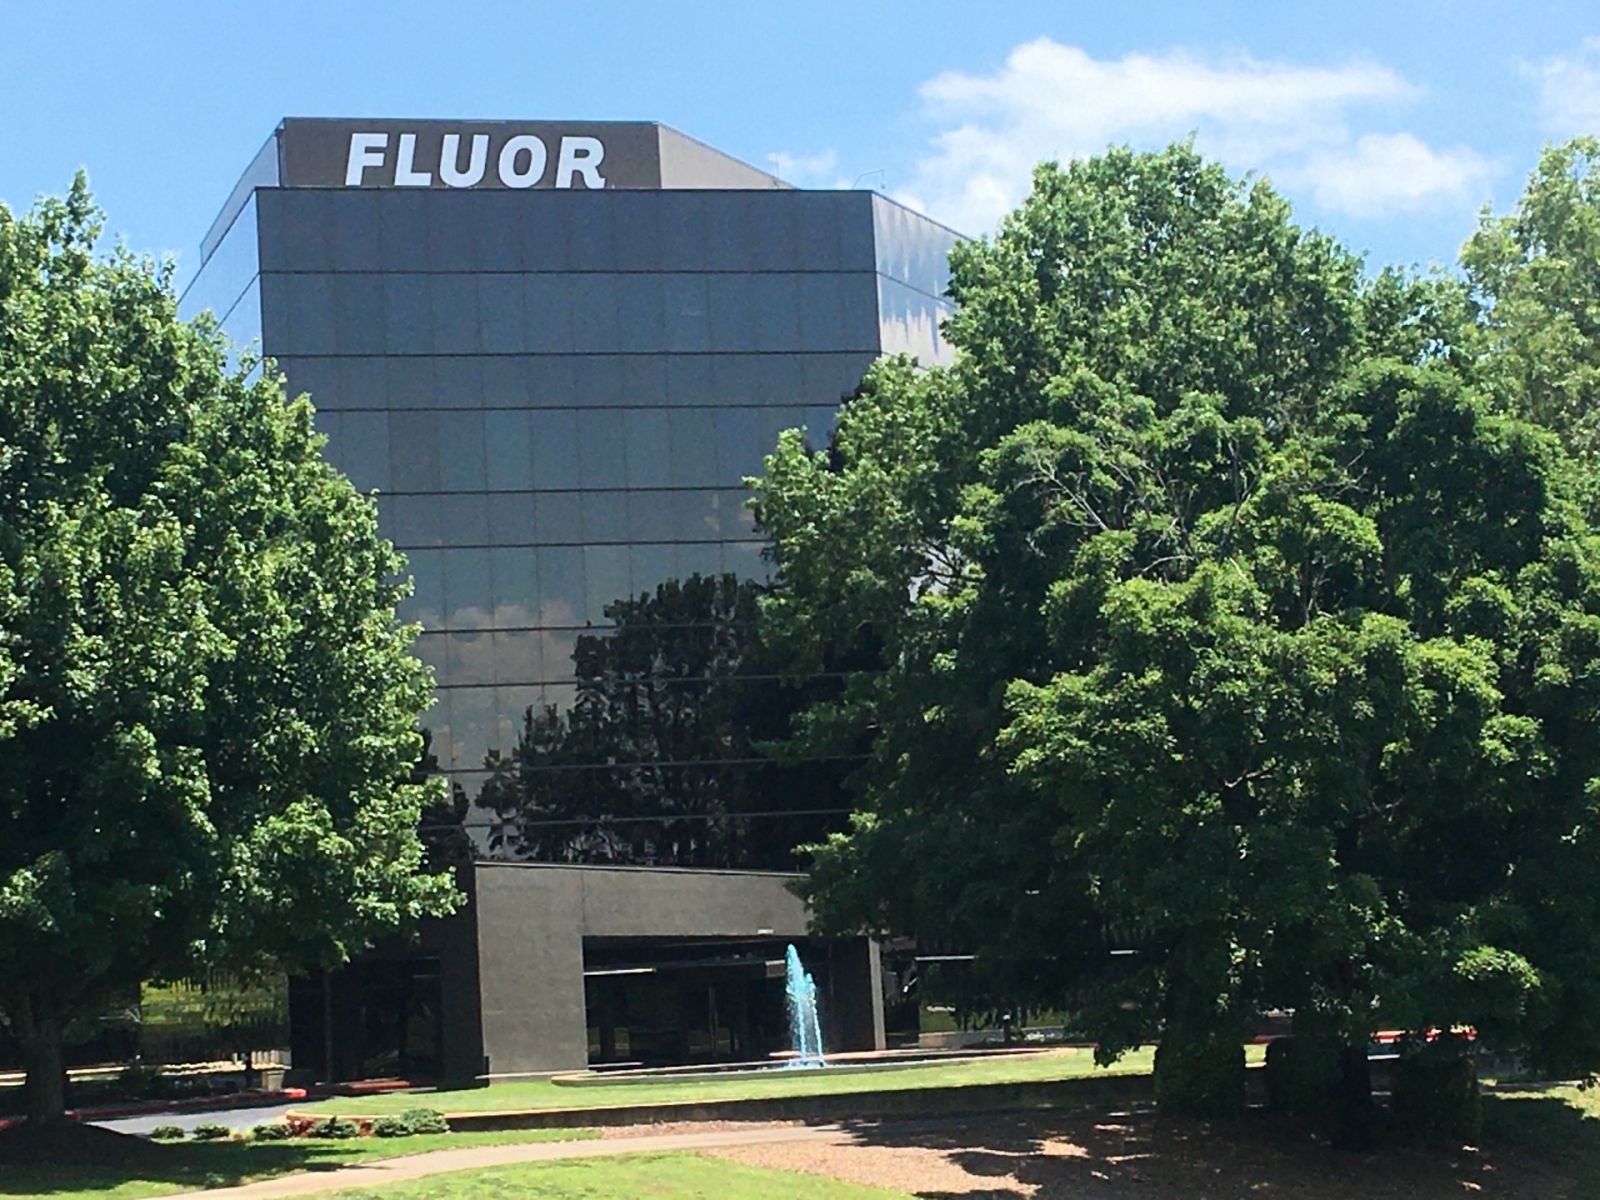 Fluor's Greenville location has now become the launching pad for at least two offshoot companies. (Photo/Molly Hulsey)